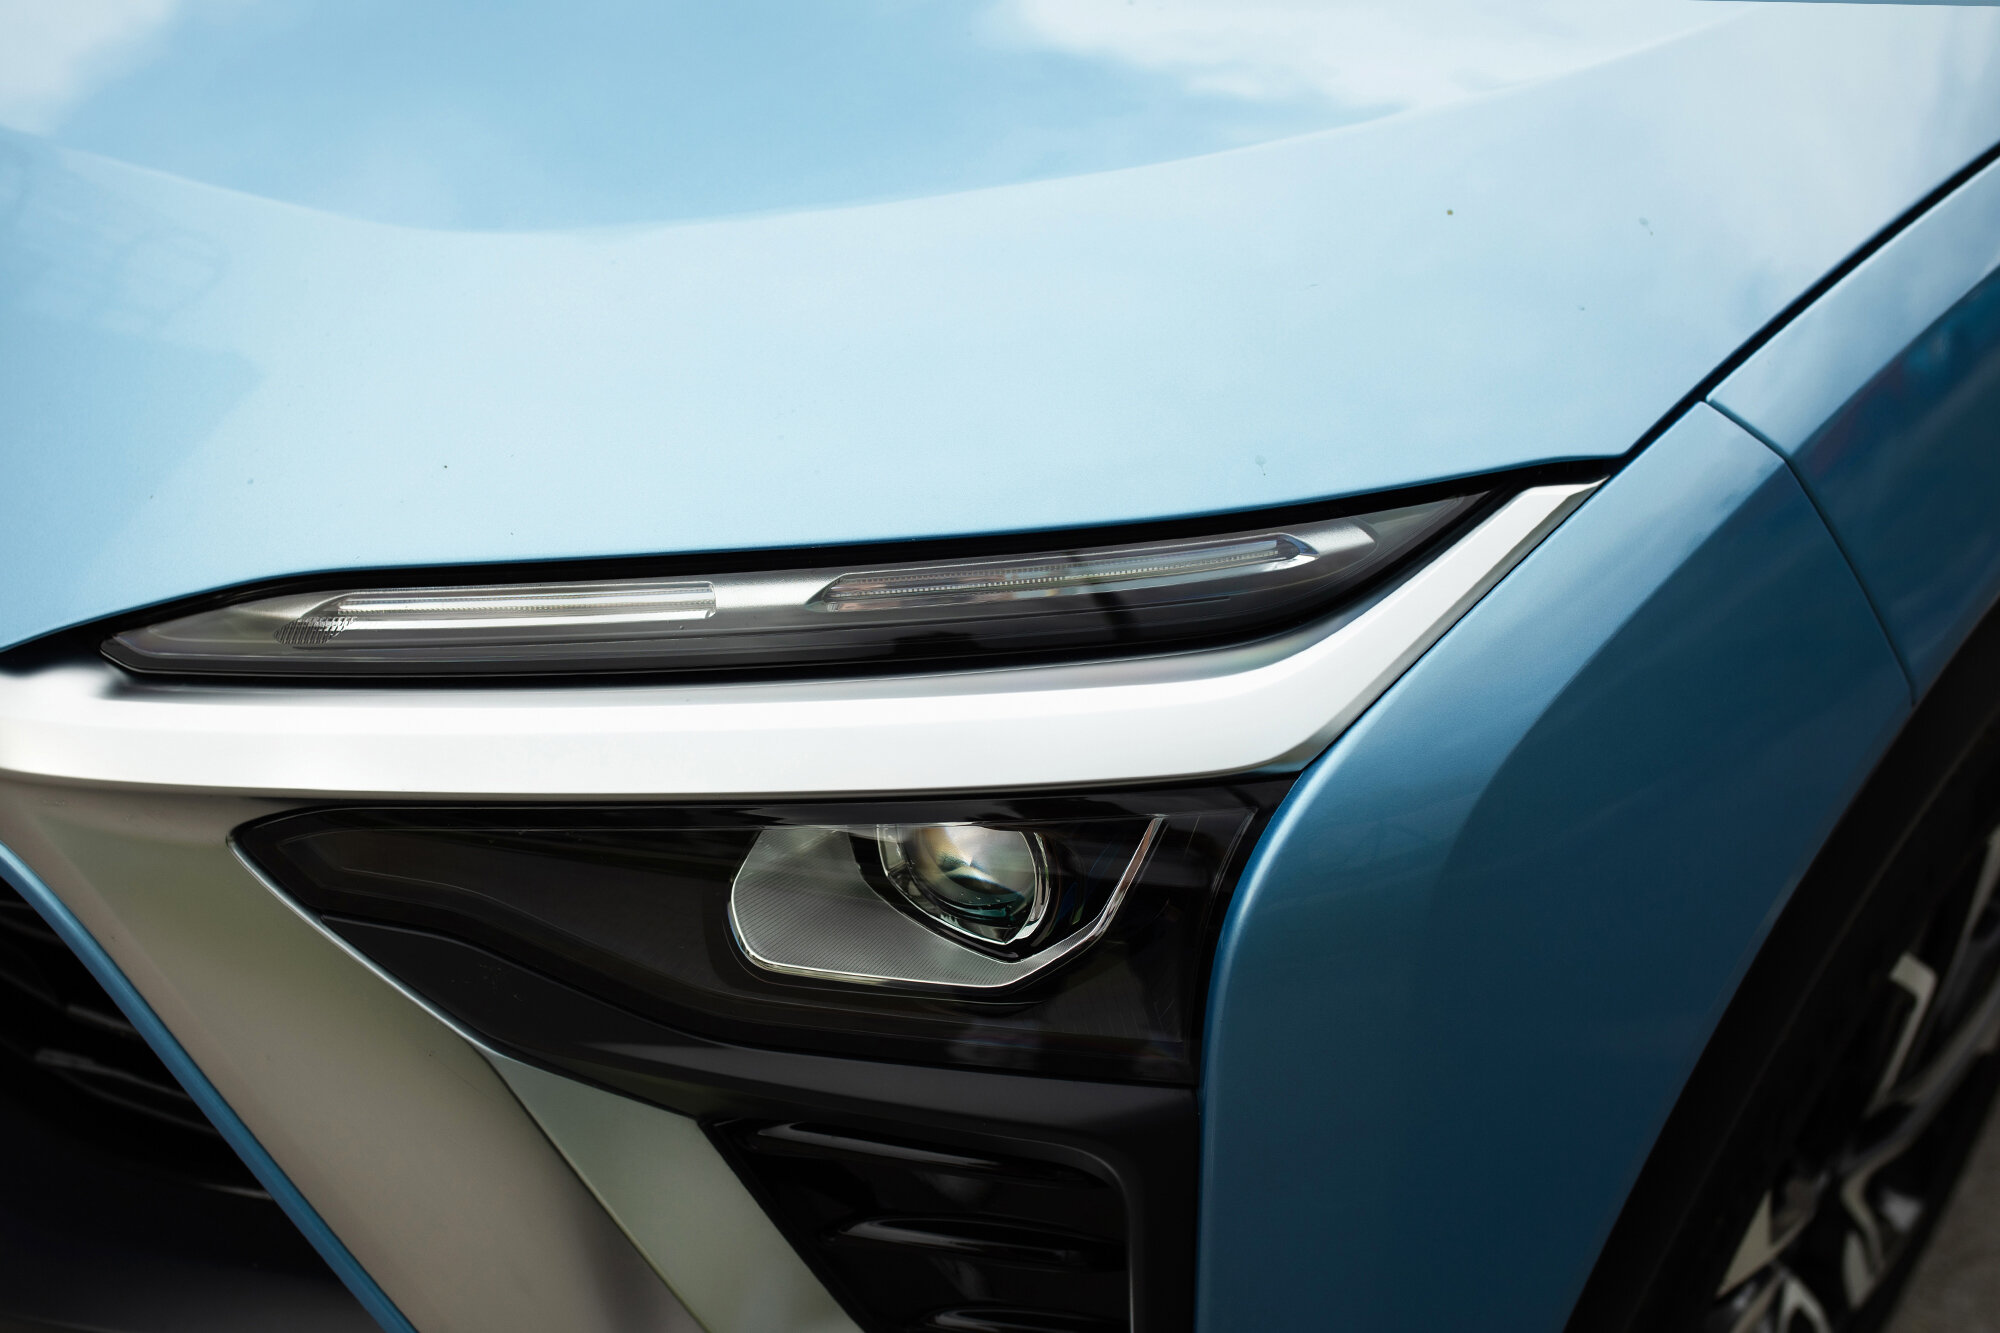 The narrow front lights of the NIO ES8